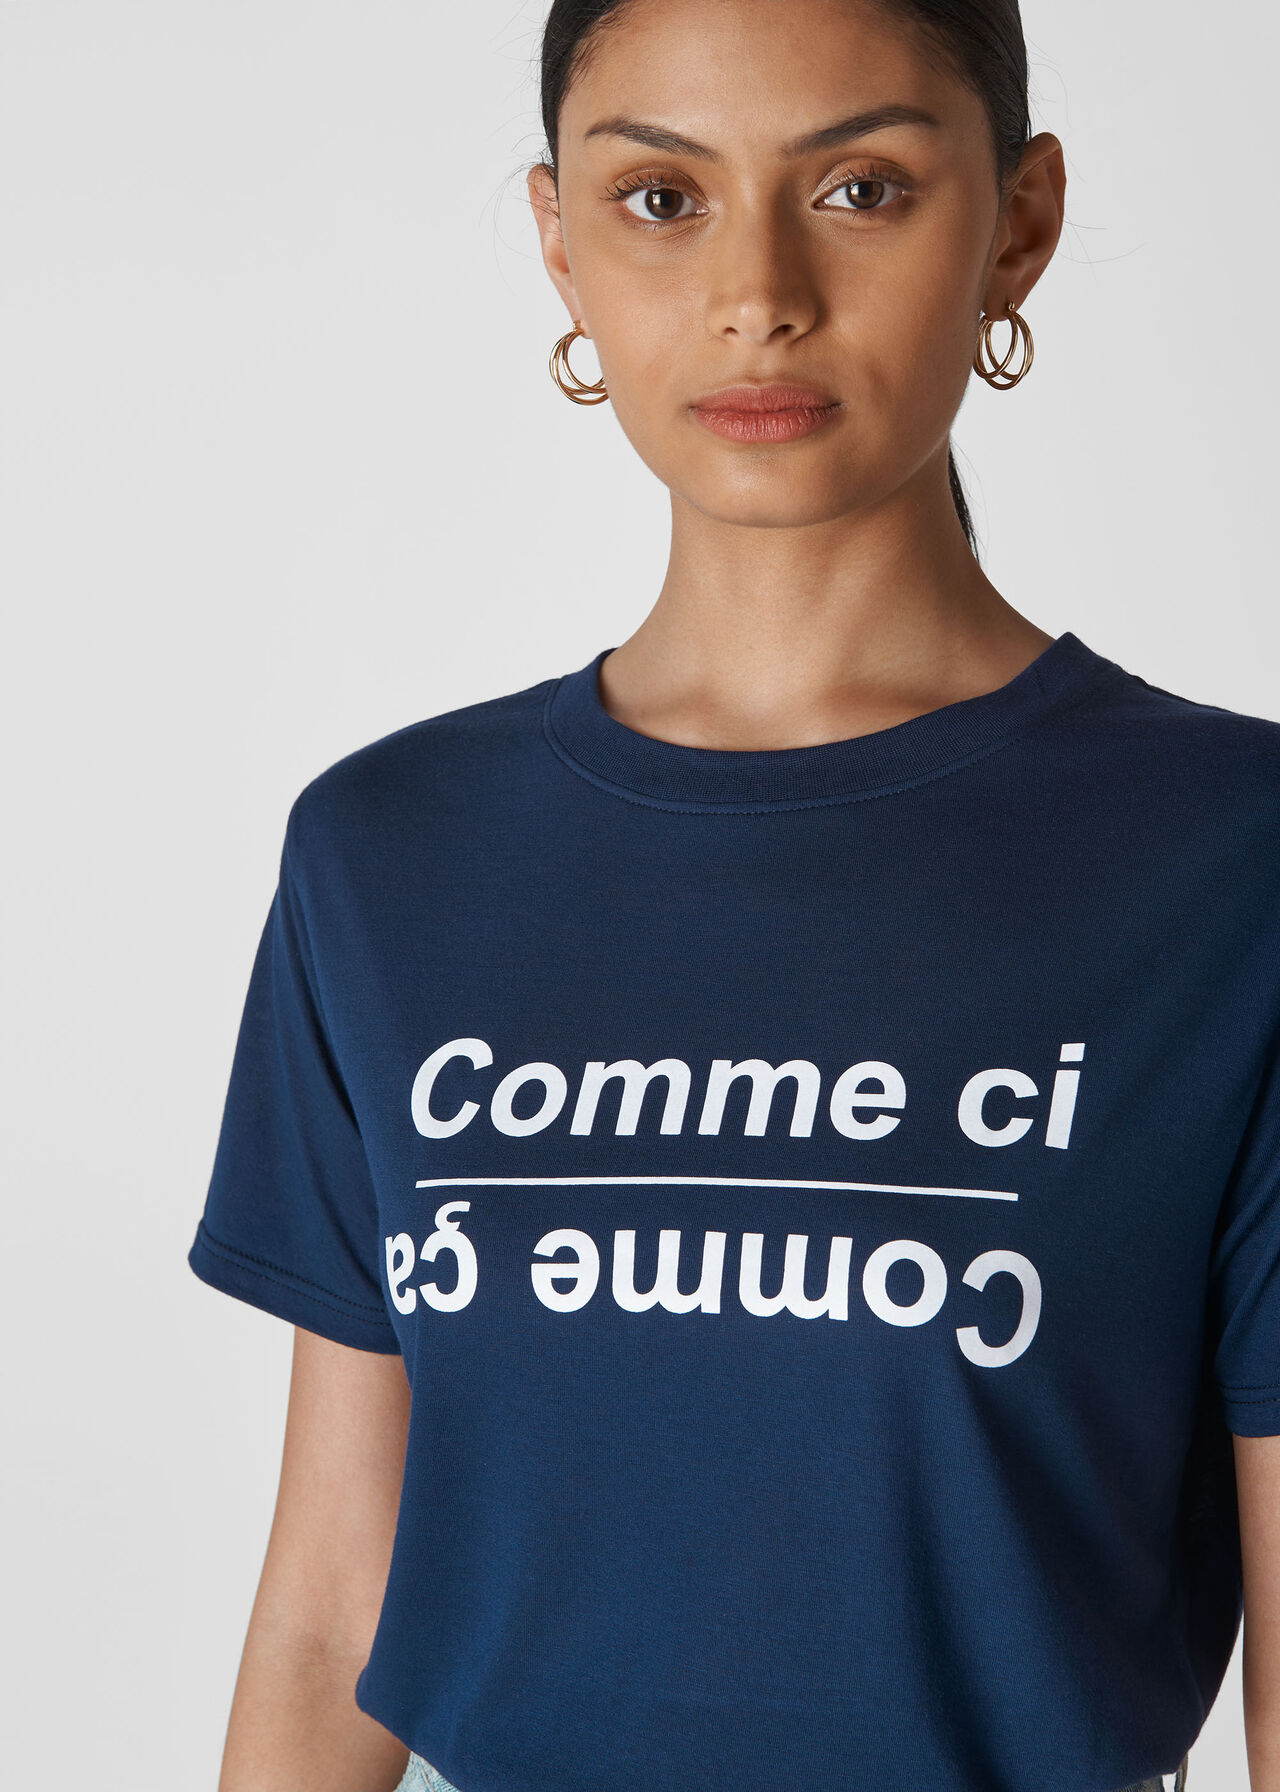 Comme Ci Comme Ca Logo Tshirt Navy